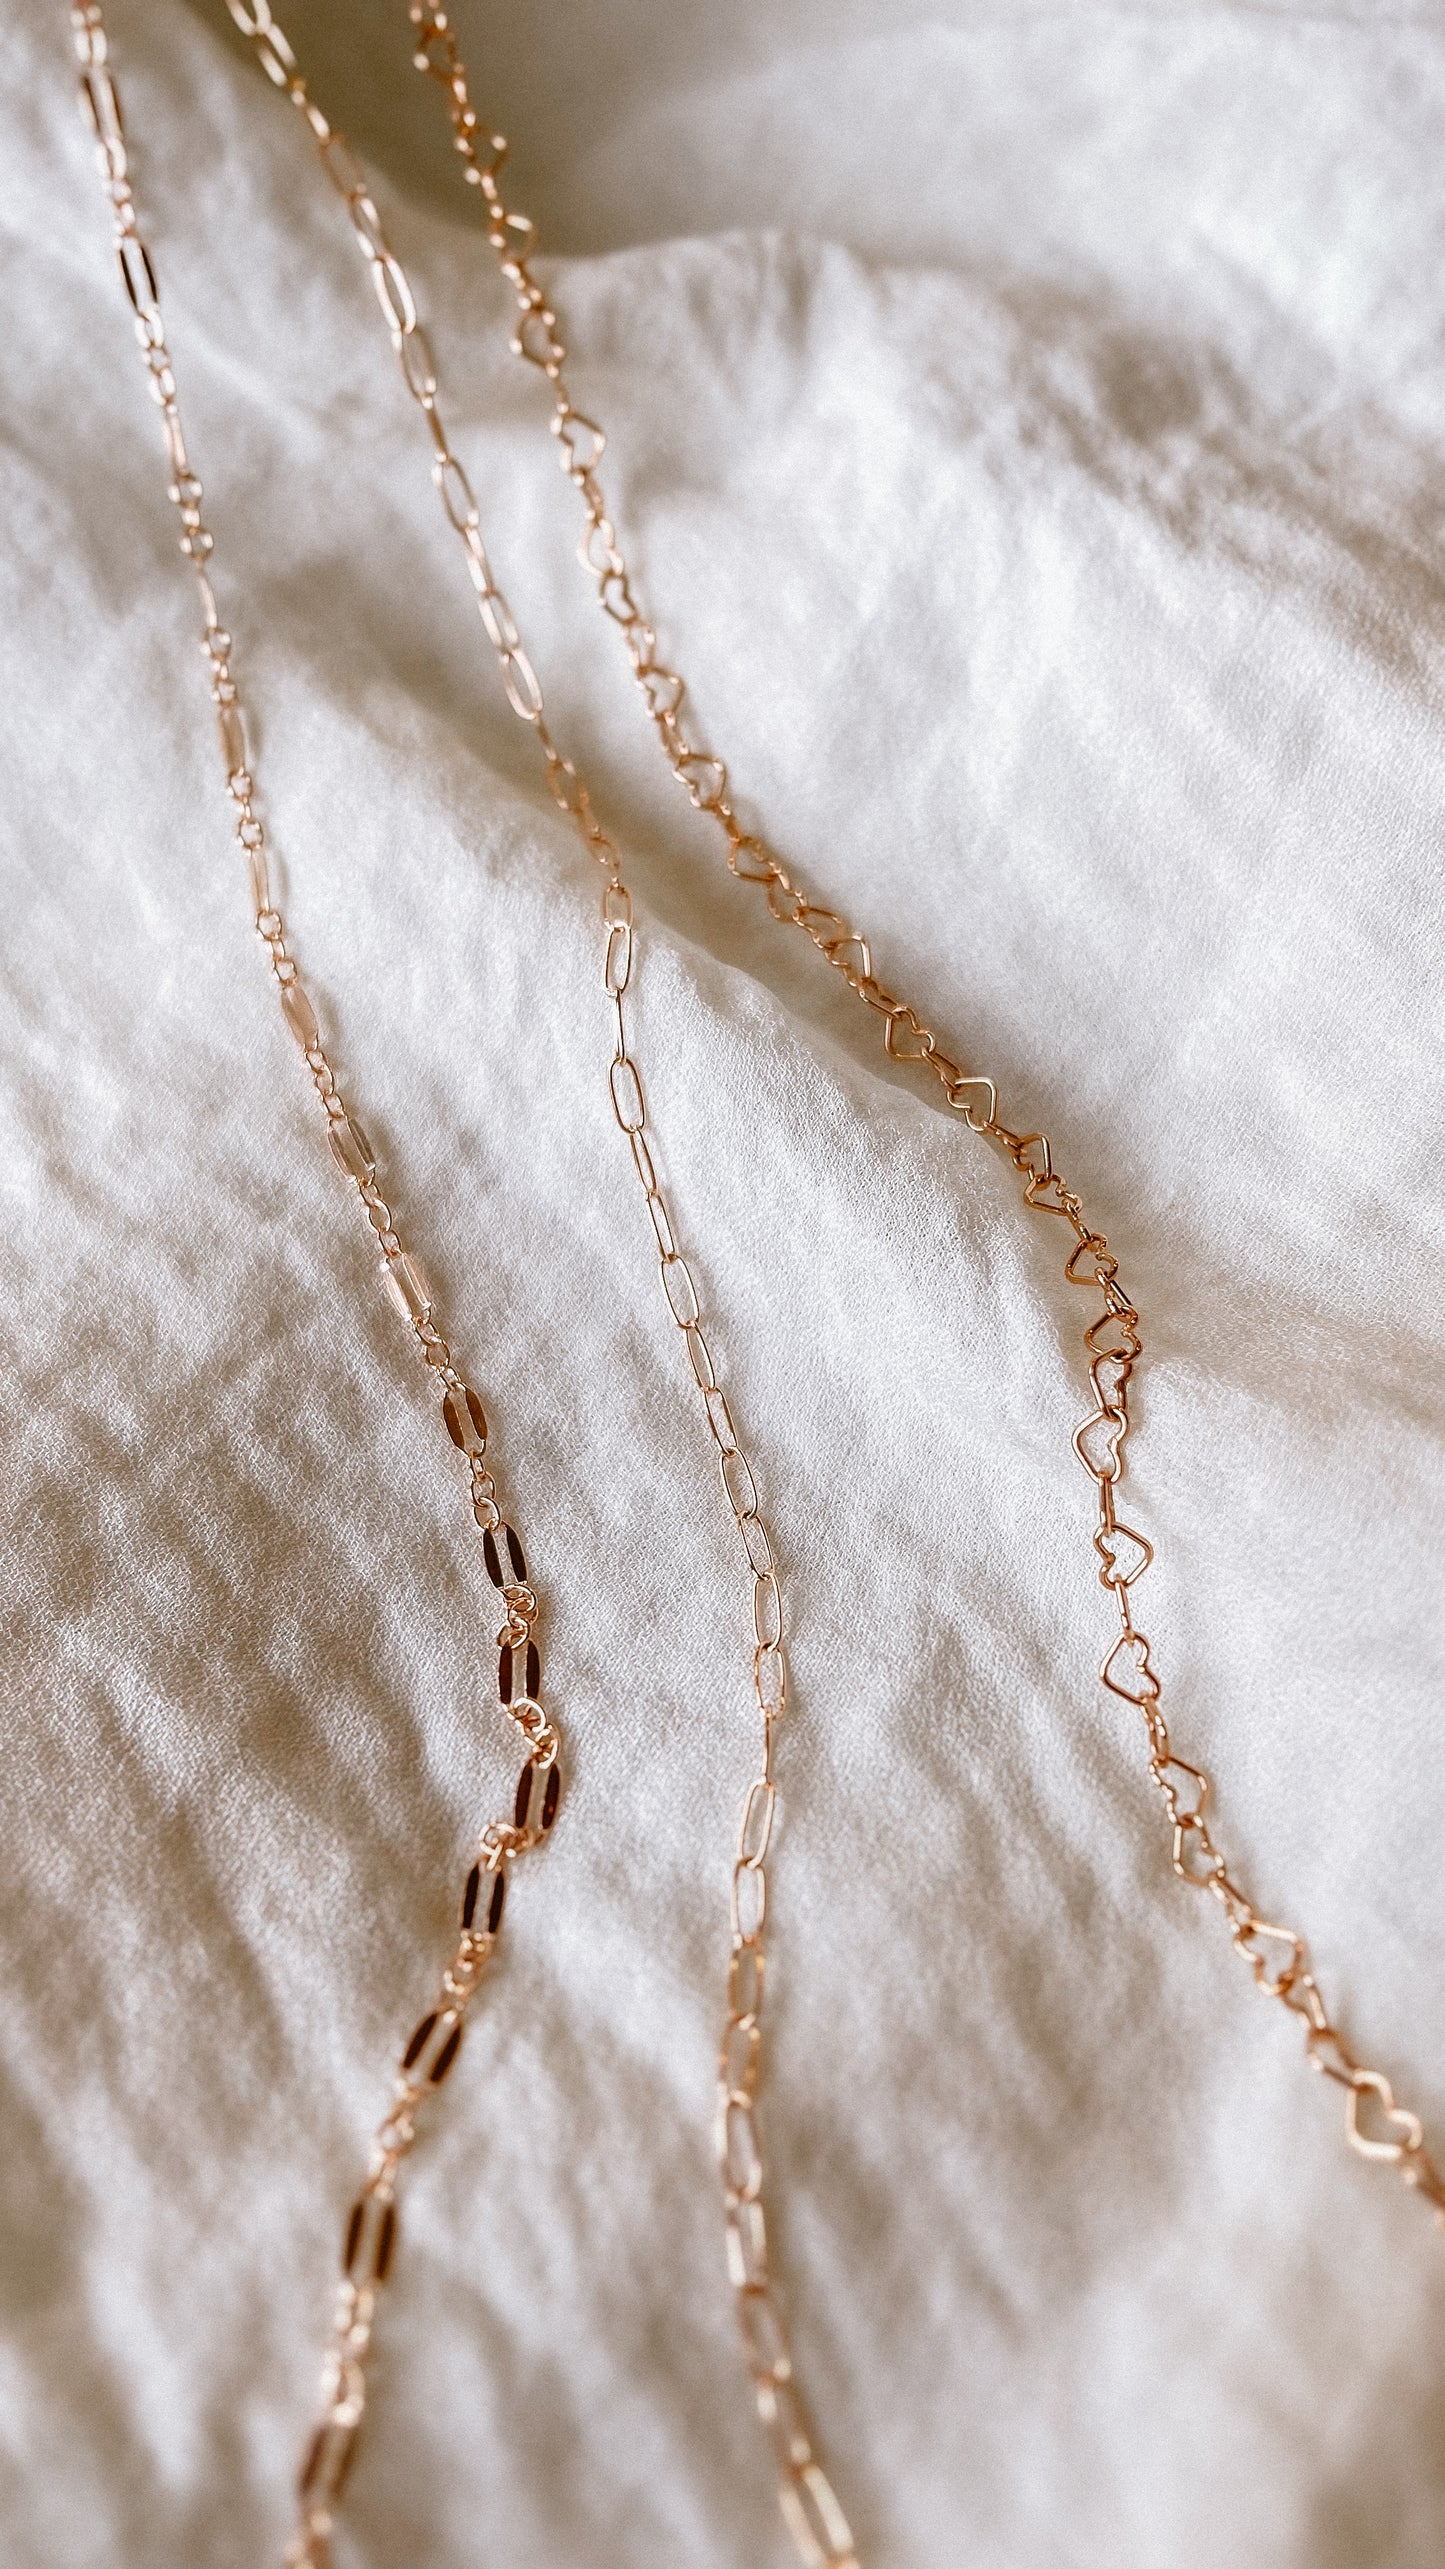 Mira Paperclip Chain in ROSE GF // RESERVATION  for IN-PERSON Permanent Jewelry